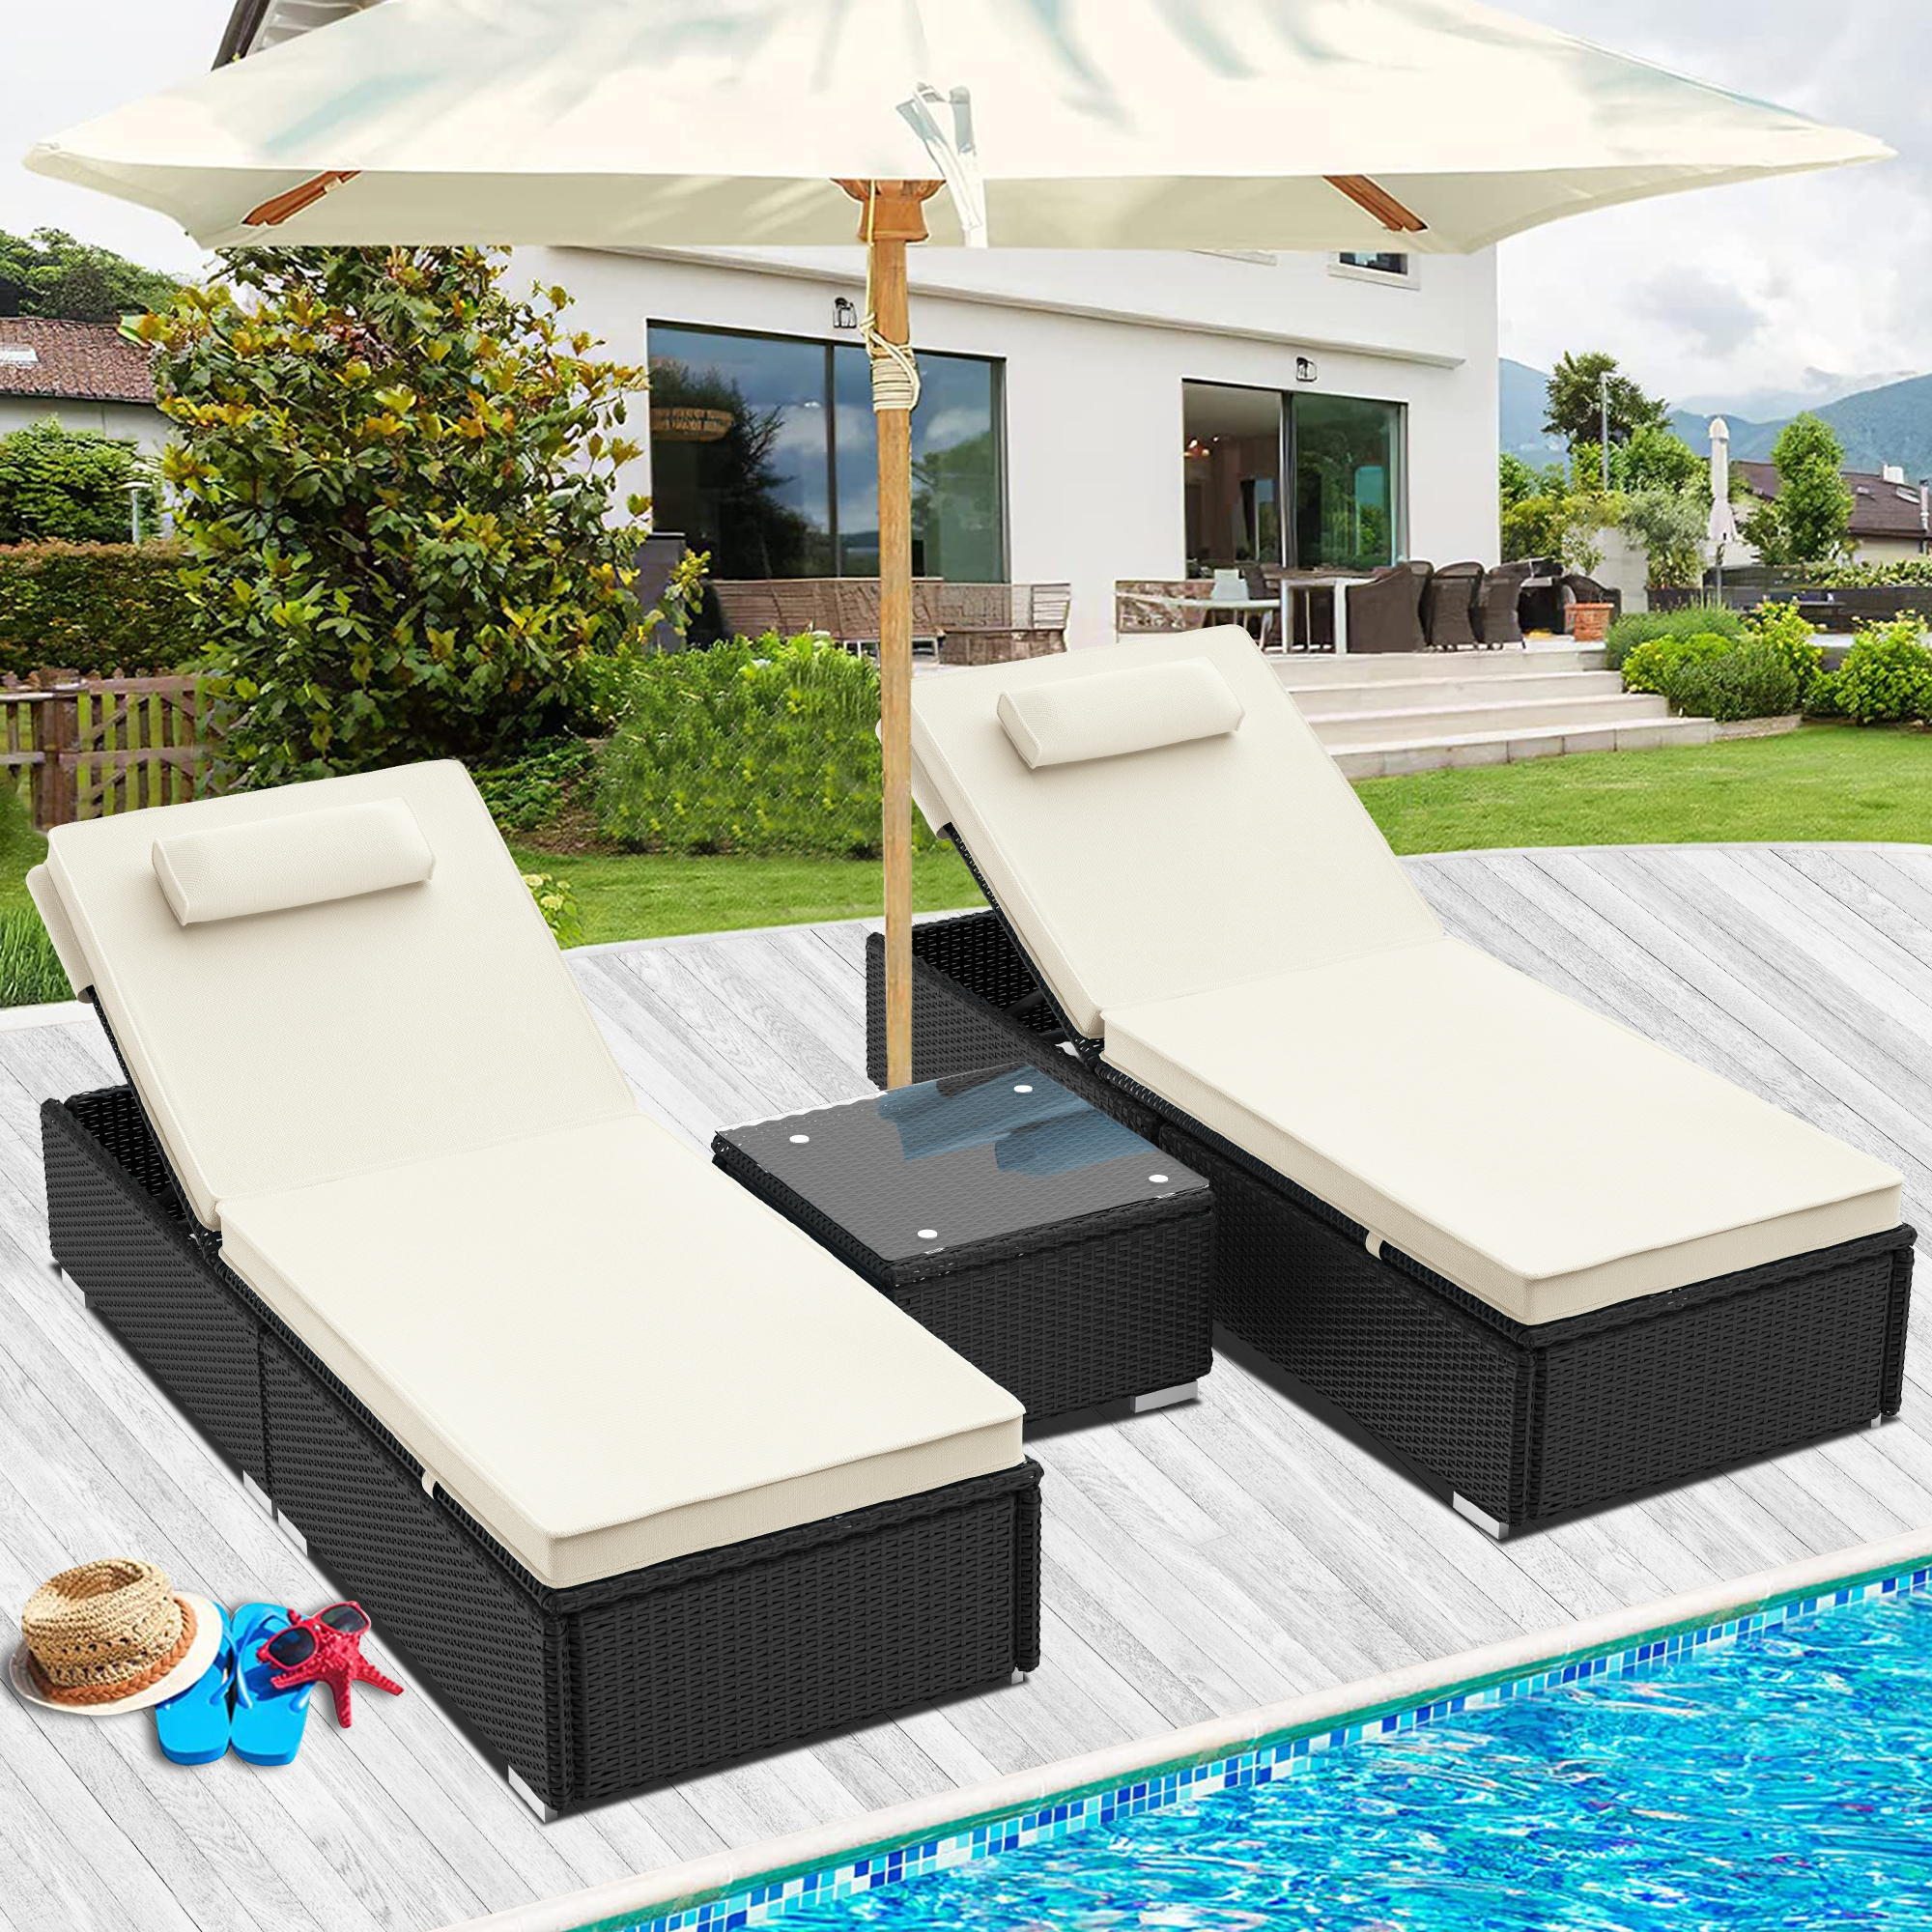 SESSLIFE 2 PCS Lounge Chair for Outside, Adjustable 5 Position Rattan Wicker Outdoor Chaise Lounge with Head Pillow & Thickened Cushion for Poolside, Patio, Garden, Deck (2, Light Beige) - image 1 of 7